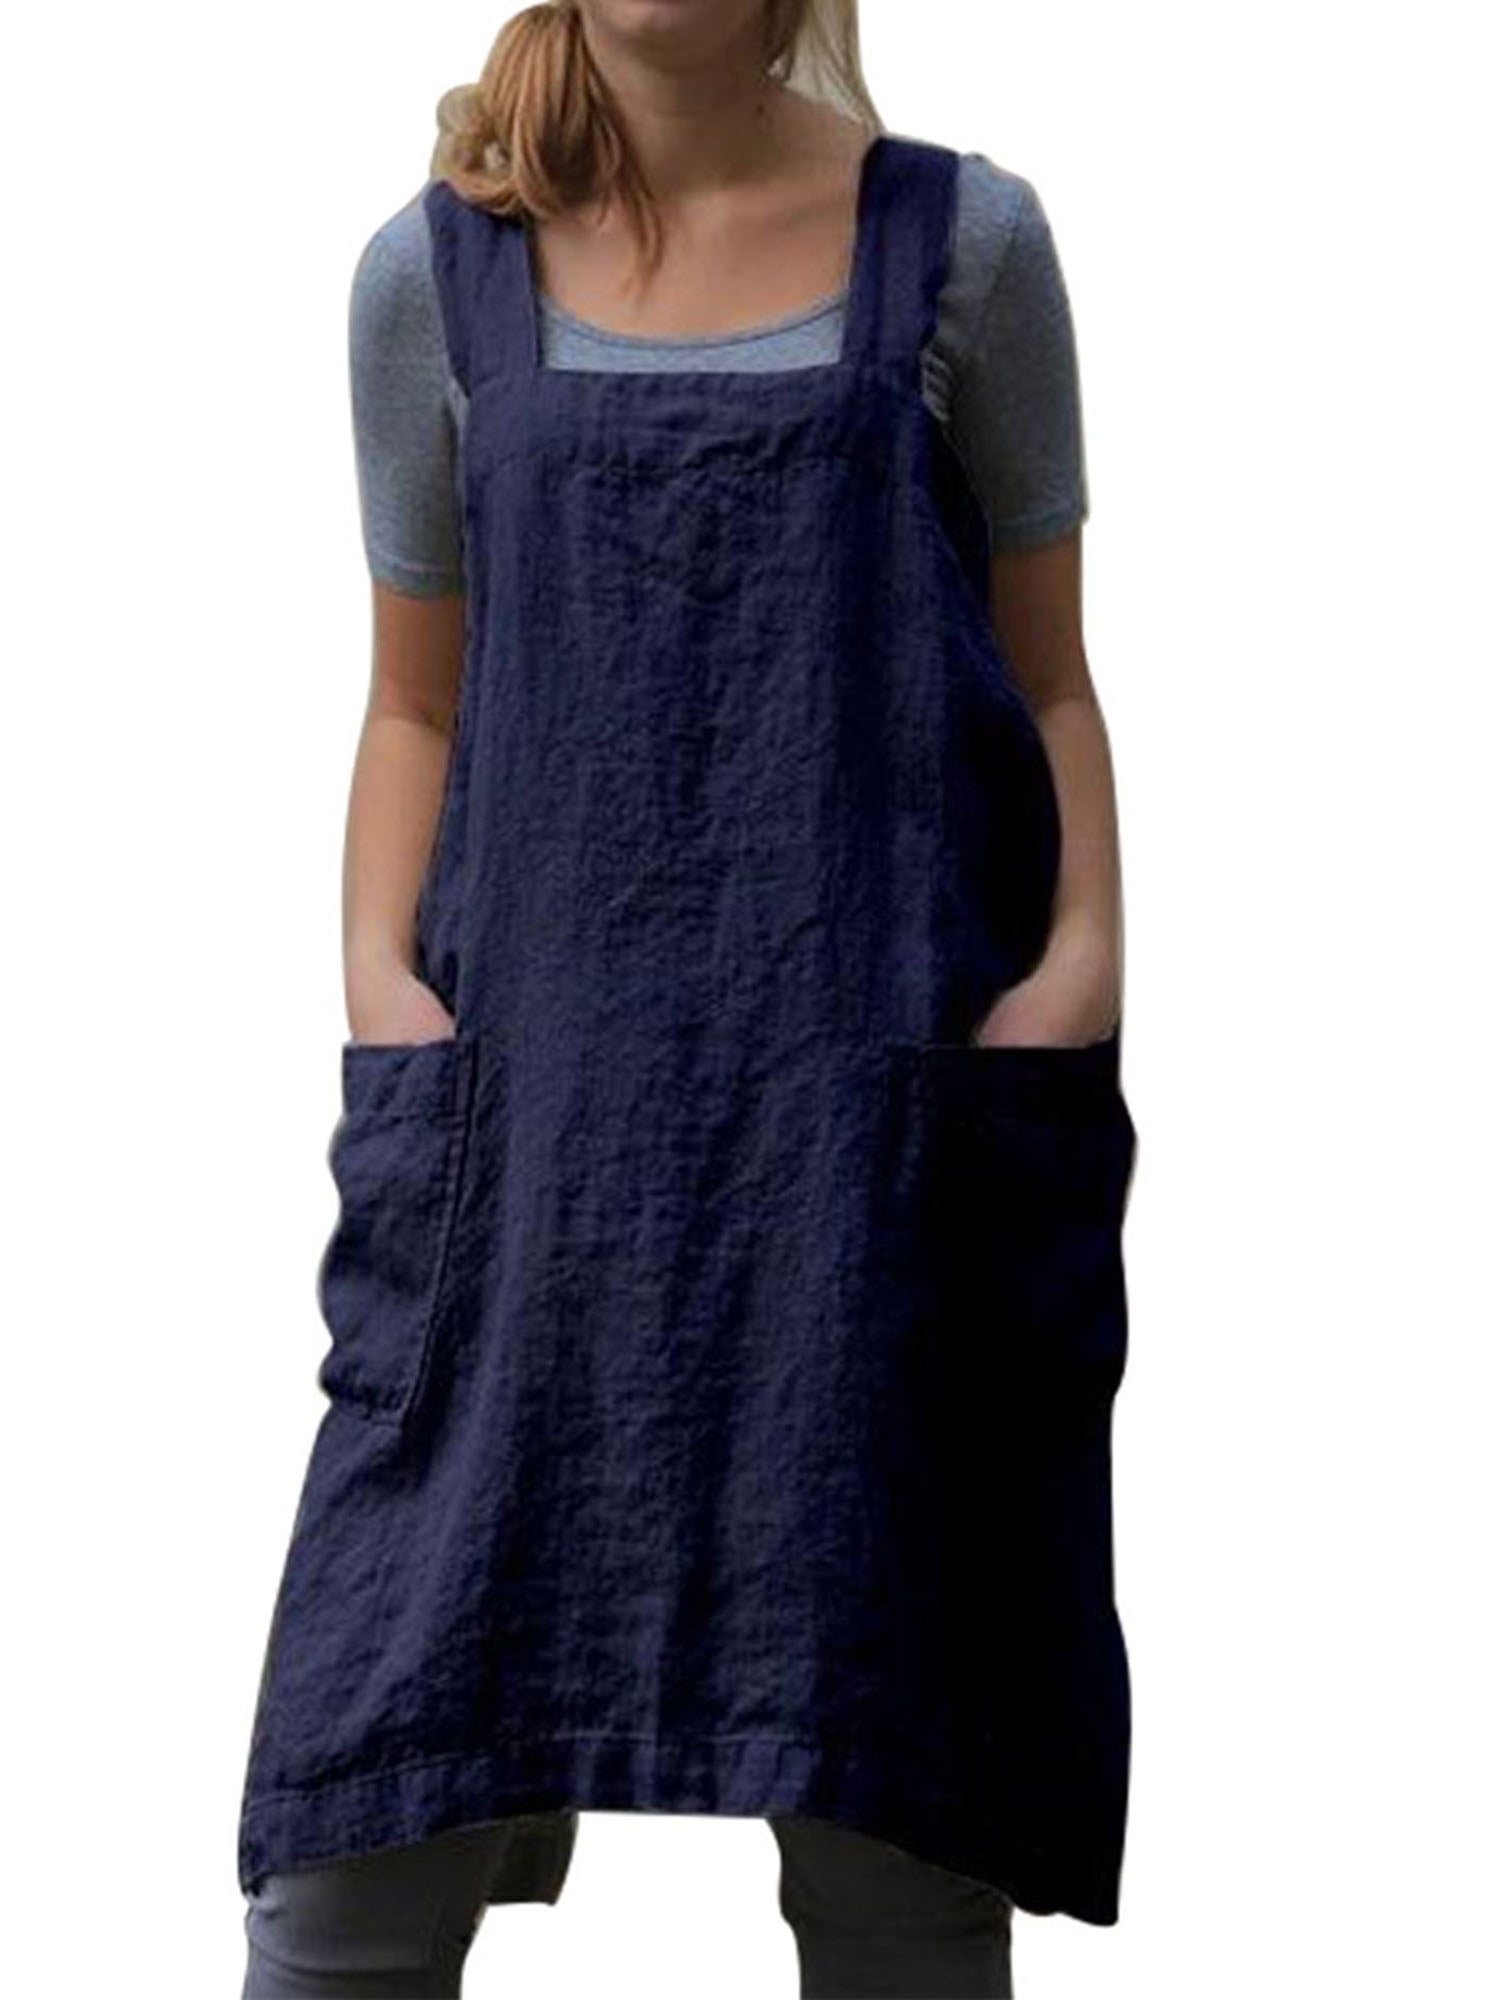 Japanese Carton Overall Vest Plaid Apron For Women With Pockets 